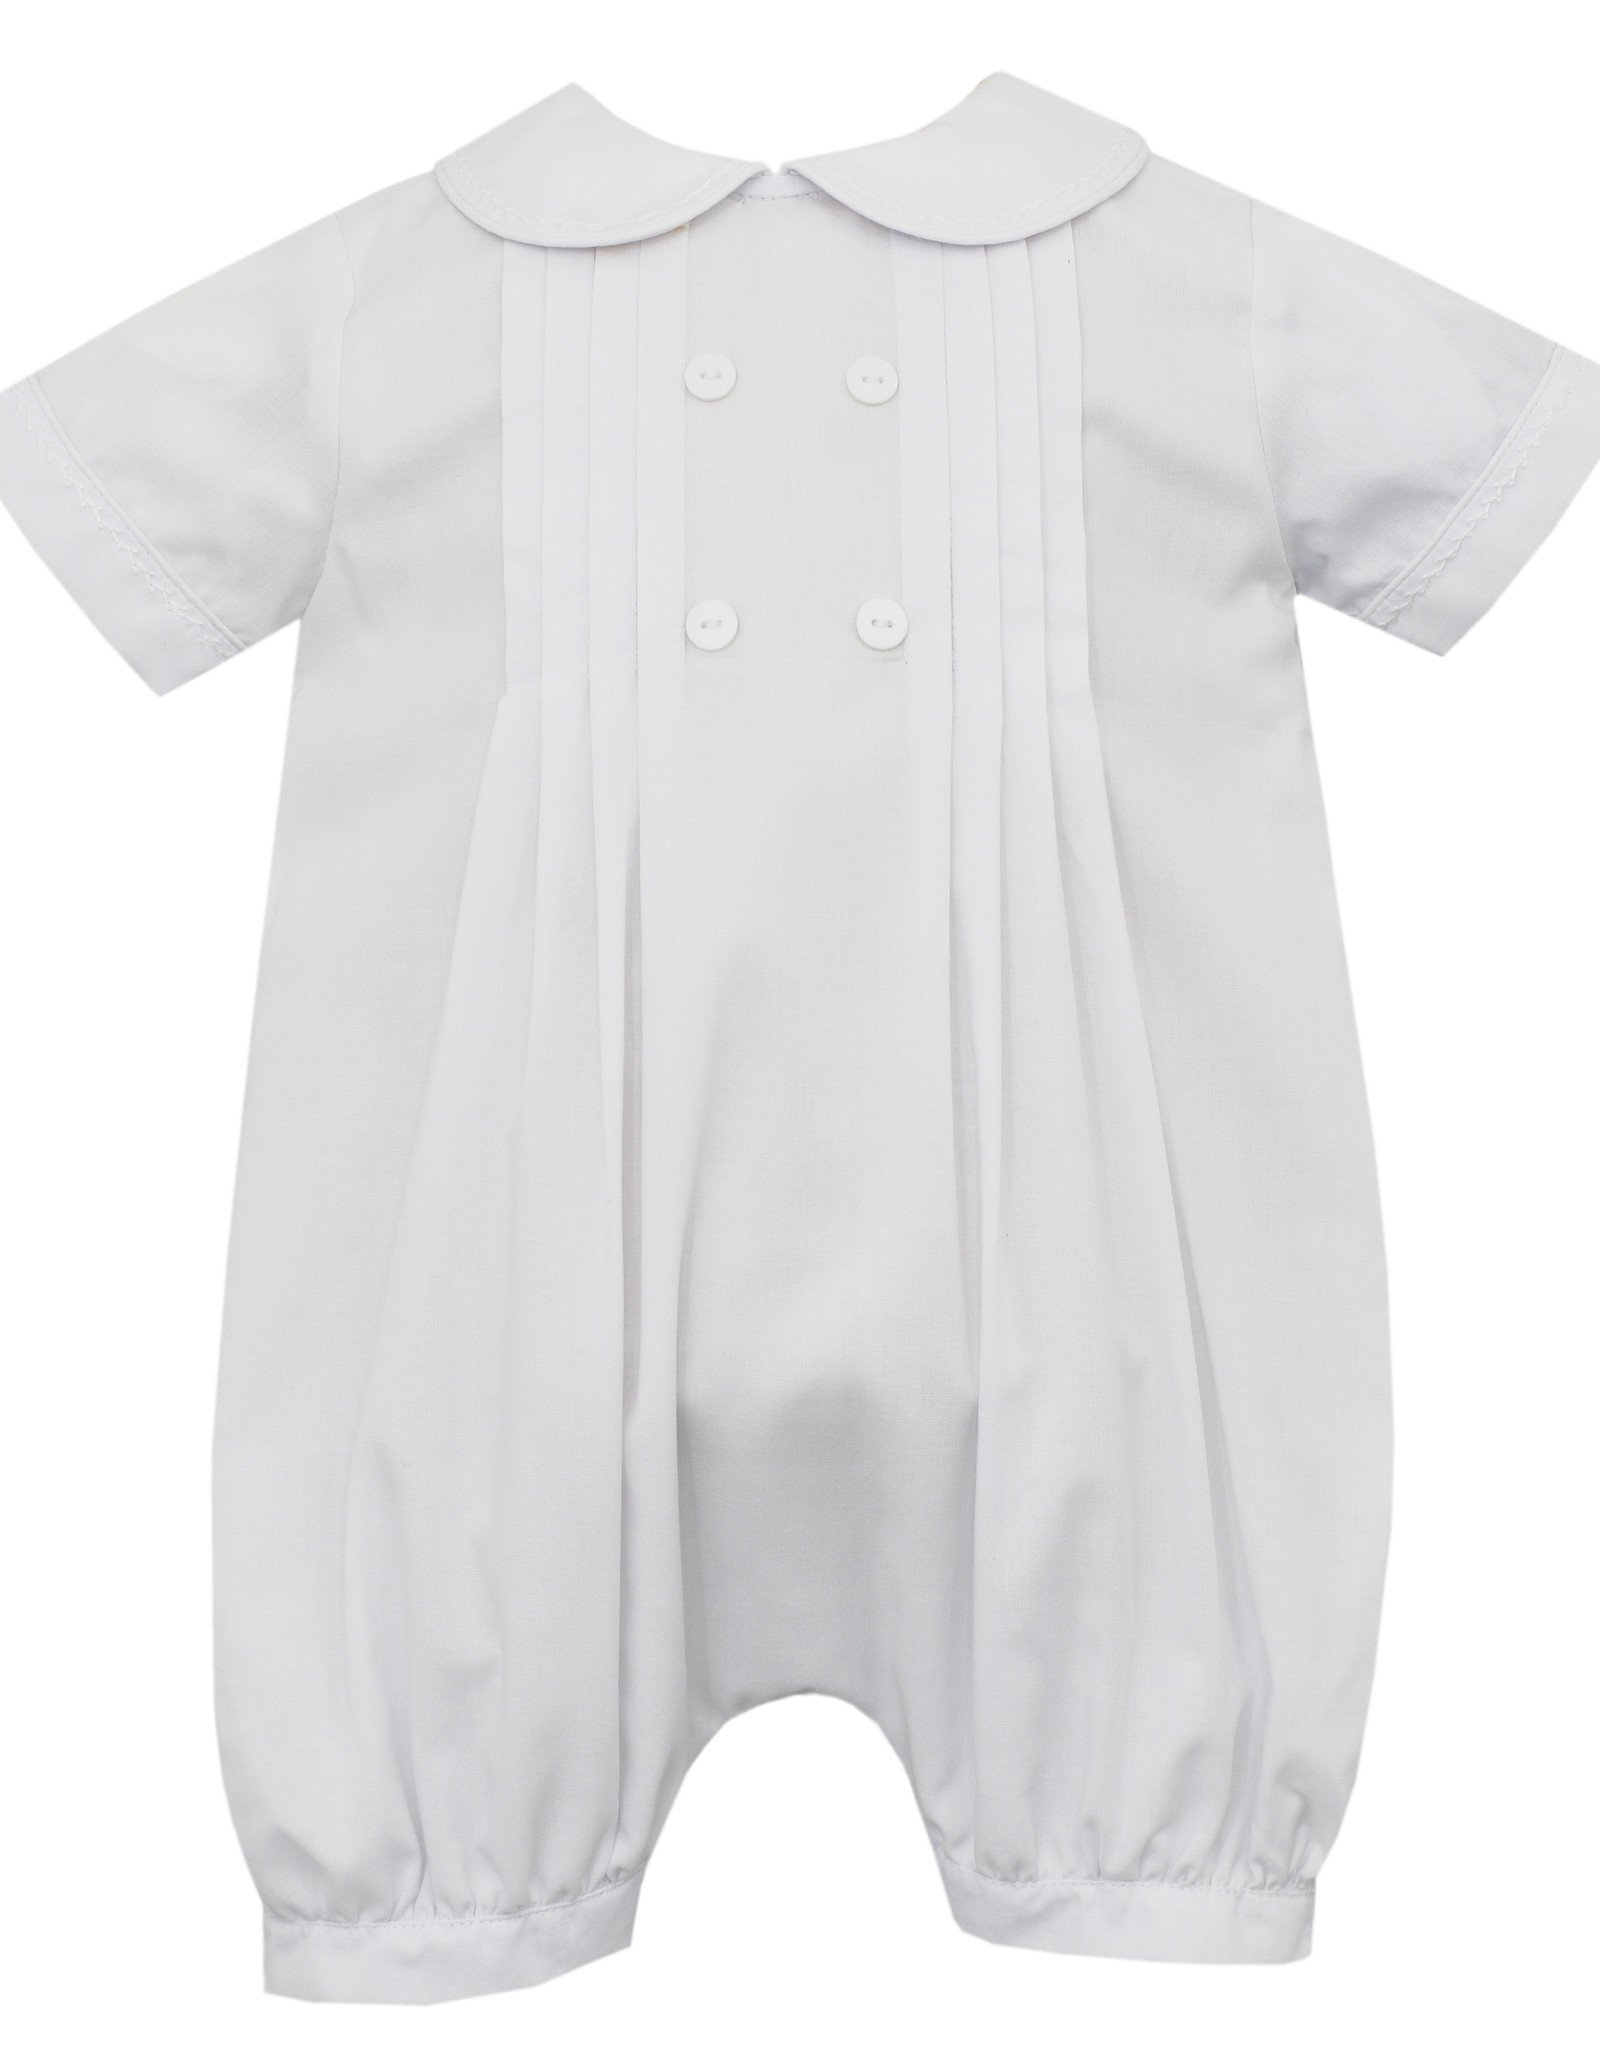 Claire and Charlie White Batiste Boys Romper with Pleats